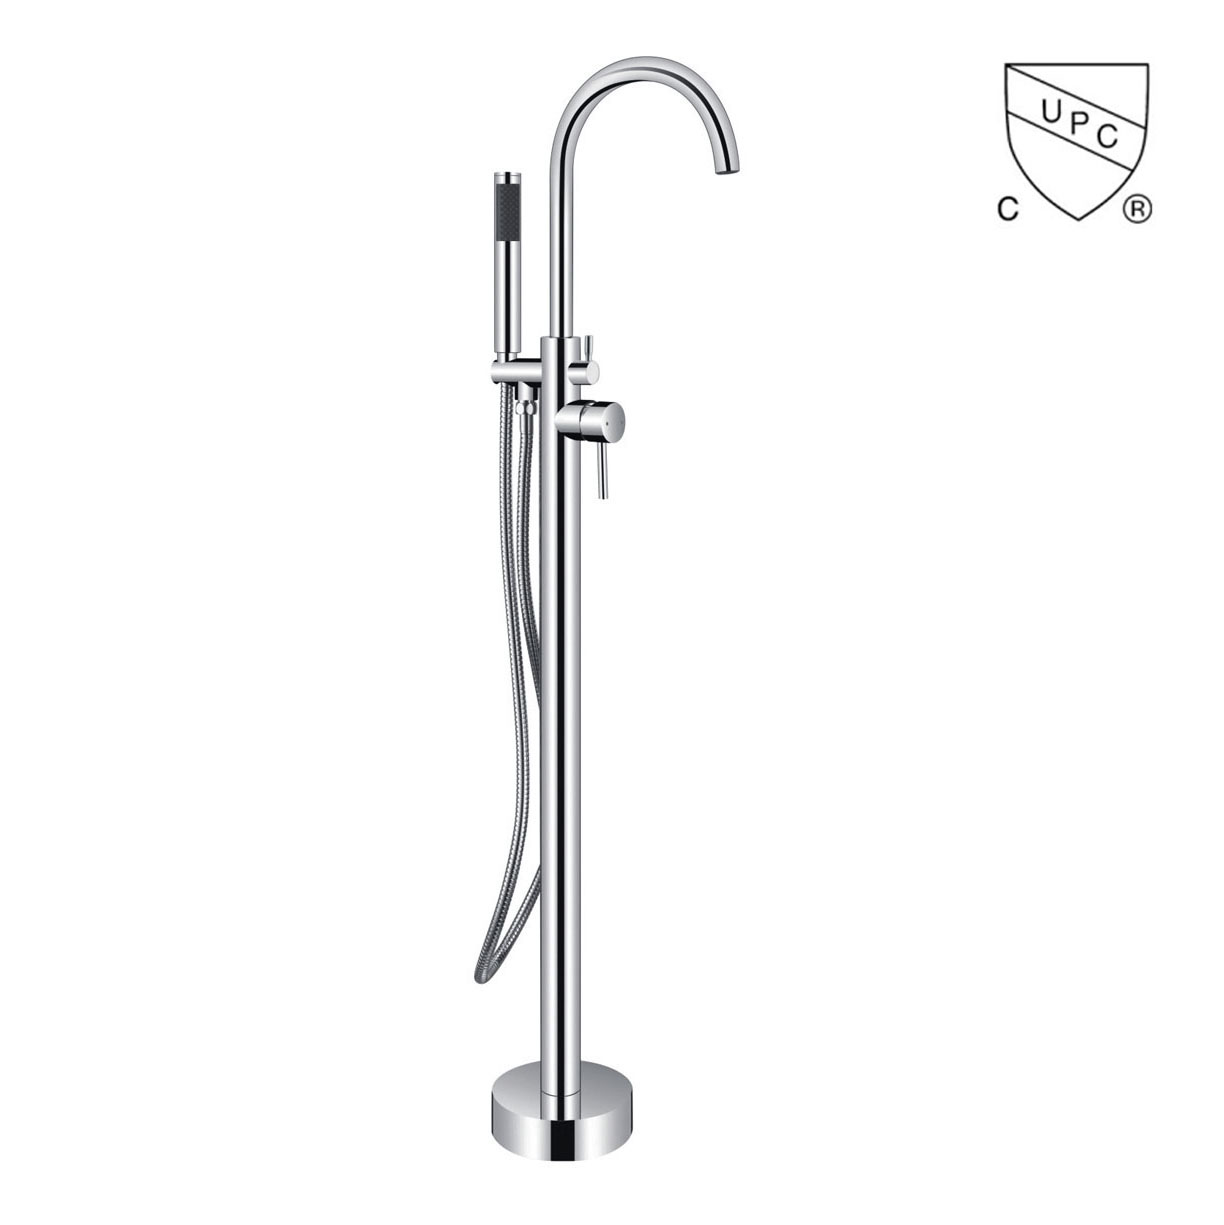 What are some tips for properly maintaining a floor mount tub faucet?